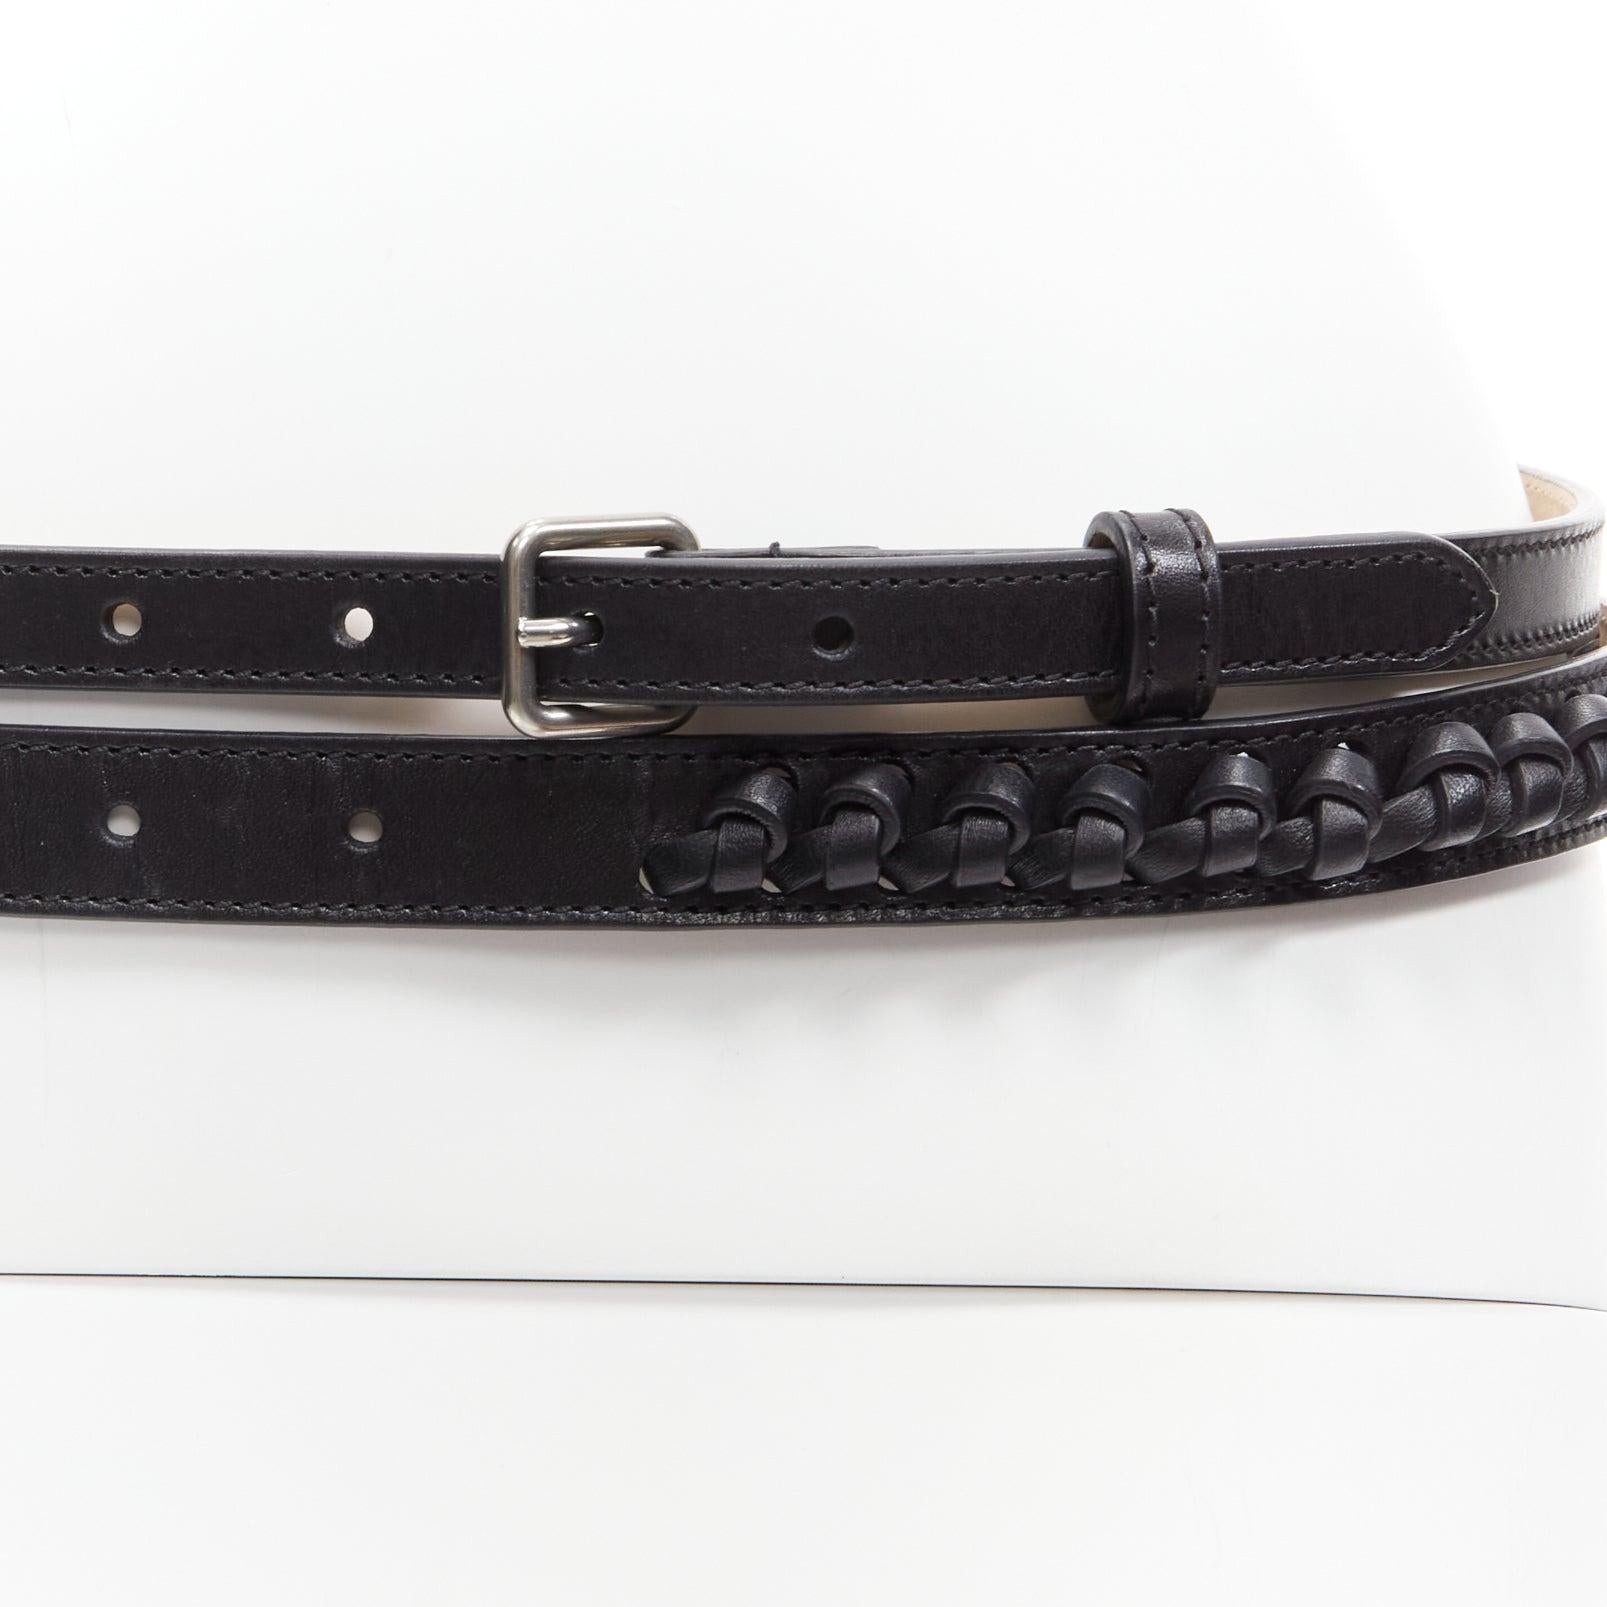 ALEXANDER MCQUEEN black leather braided detail double wrap belt 80cm
Reference: KEDG/A00256
Brand: Alexander McQueen
Designer: Sarah Burton
Material: Leather, Metal
Color: Black
Pattern: Solid
Closure: Buckle
Lining: Beige Leather
Made in: